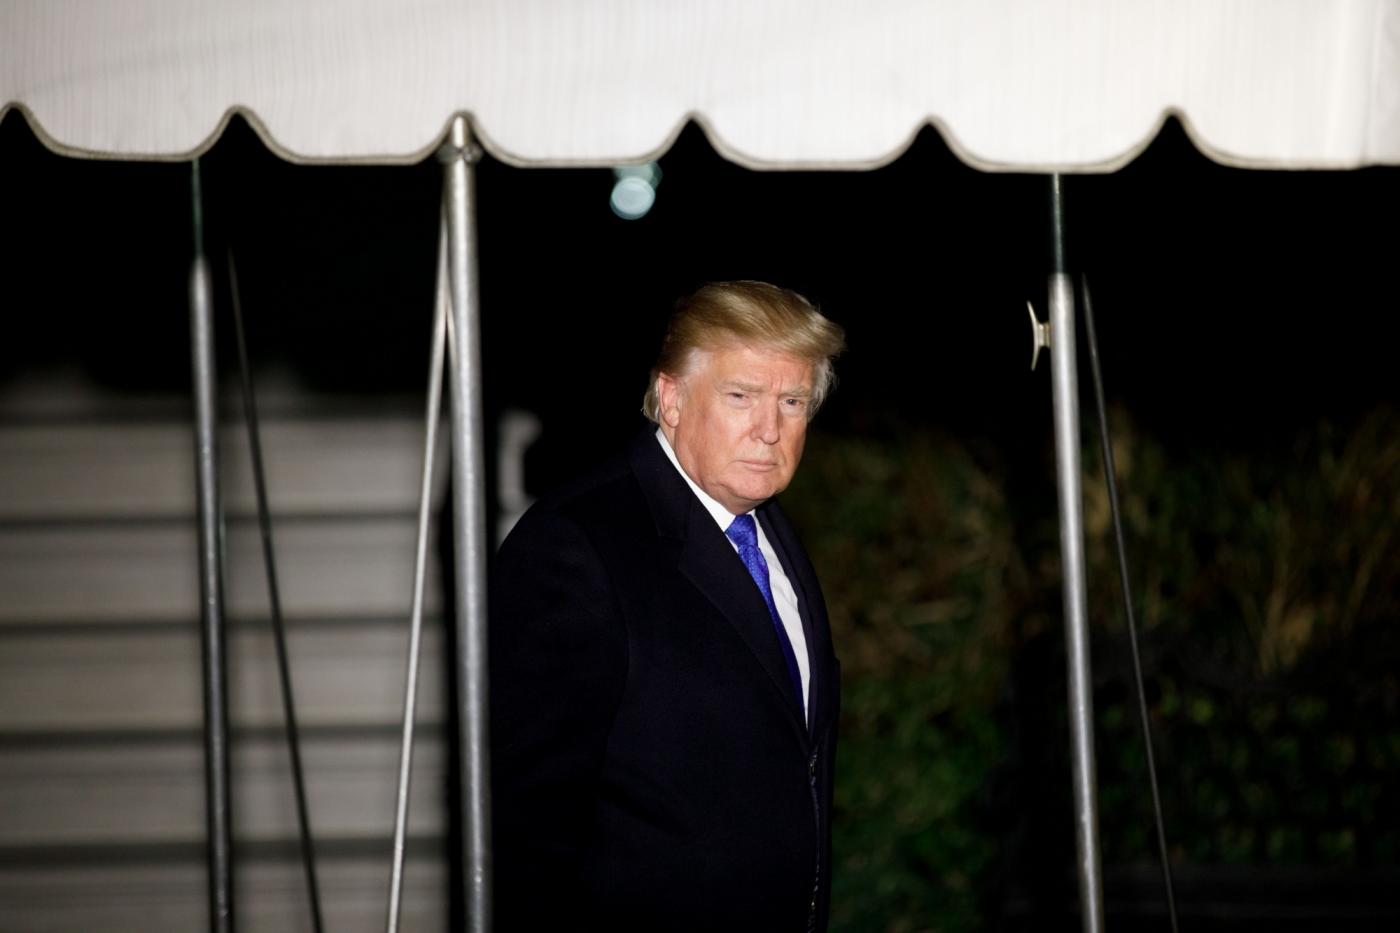 WASHINGTON, Jan. 25, 2018 (Xinhua) -- U.S. President Donald Trump leaves the White House for the World Economic Forum in Davos Switzerland, in Washington D.C., the United States, on Jan. 24, 2018. U.S. President Donald Trump spoke by phone with his Turkish counterpart Recep Tayyip Erdogan on Wednesday, urging his NATO ally to limit its military actions in northern Syria, according to a White House statement. (Xinhua/Ting Shen/IANS) by .